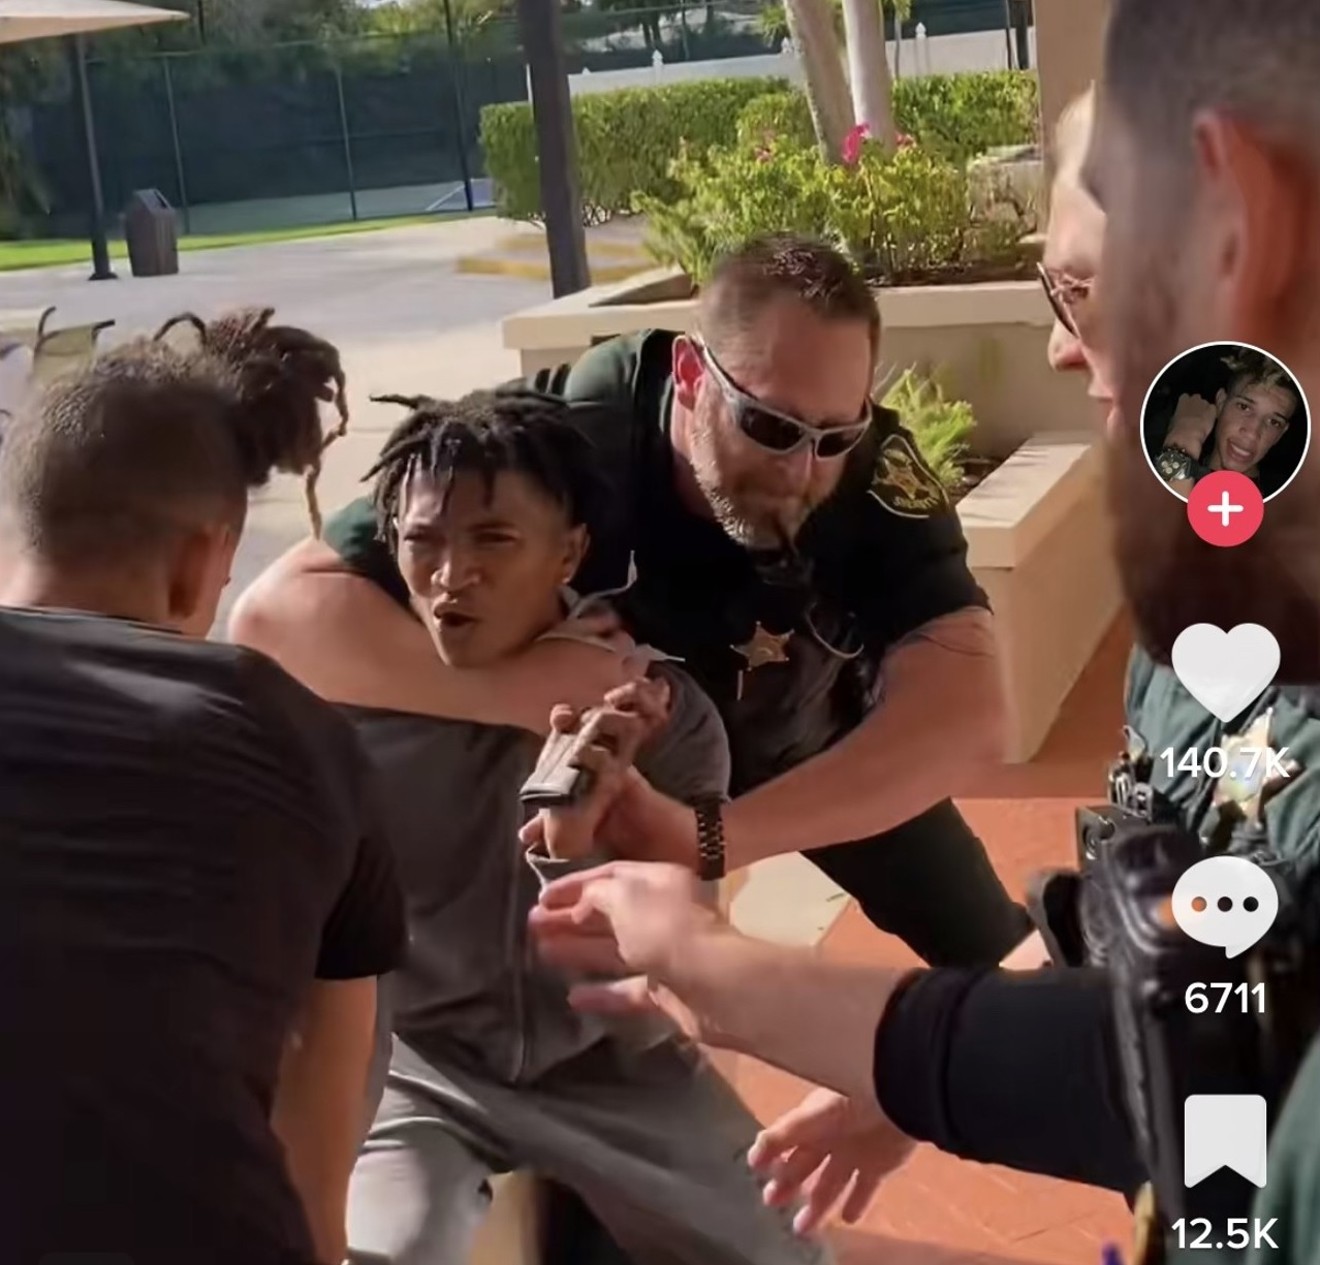 A BSO deputy put Khalil Pace in a chokehold and took him to the pavement outside Bonaventure Town Center Club.